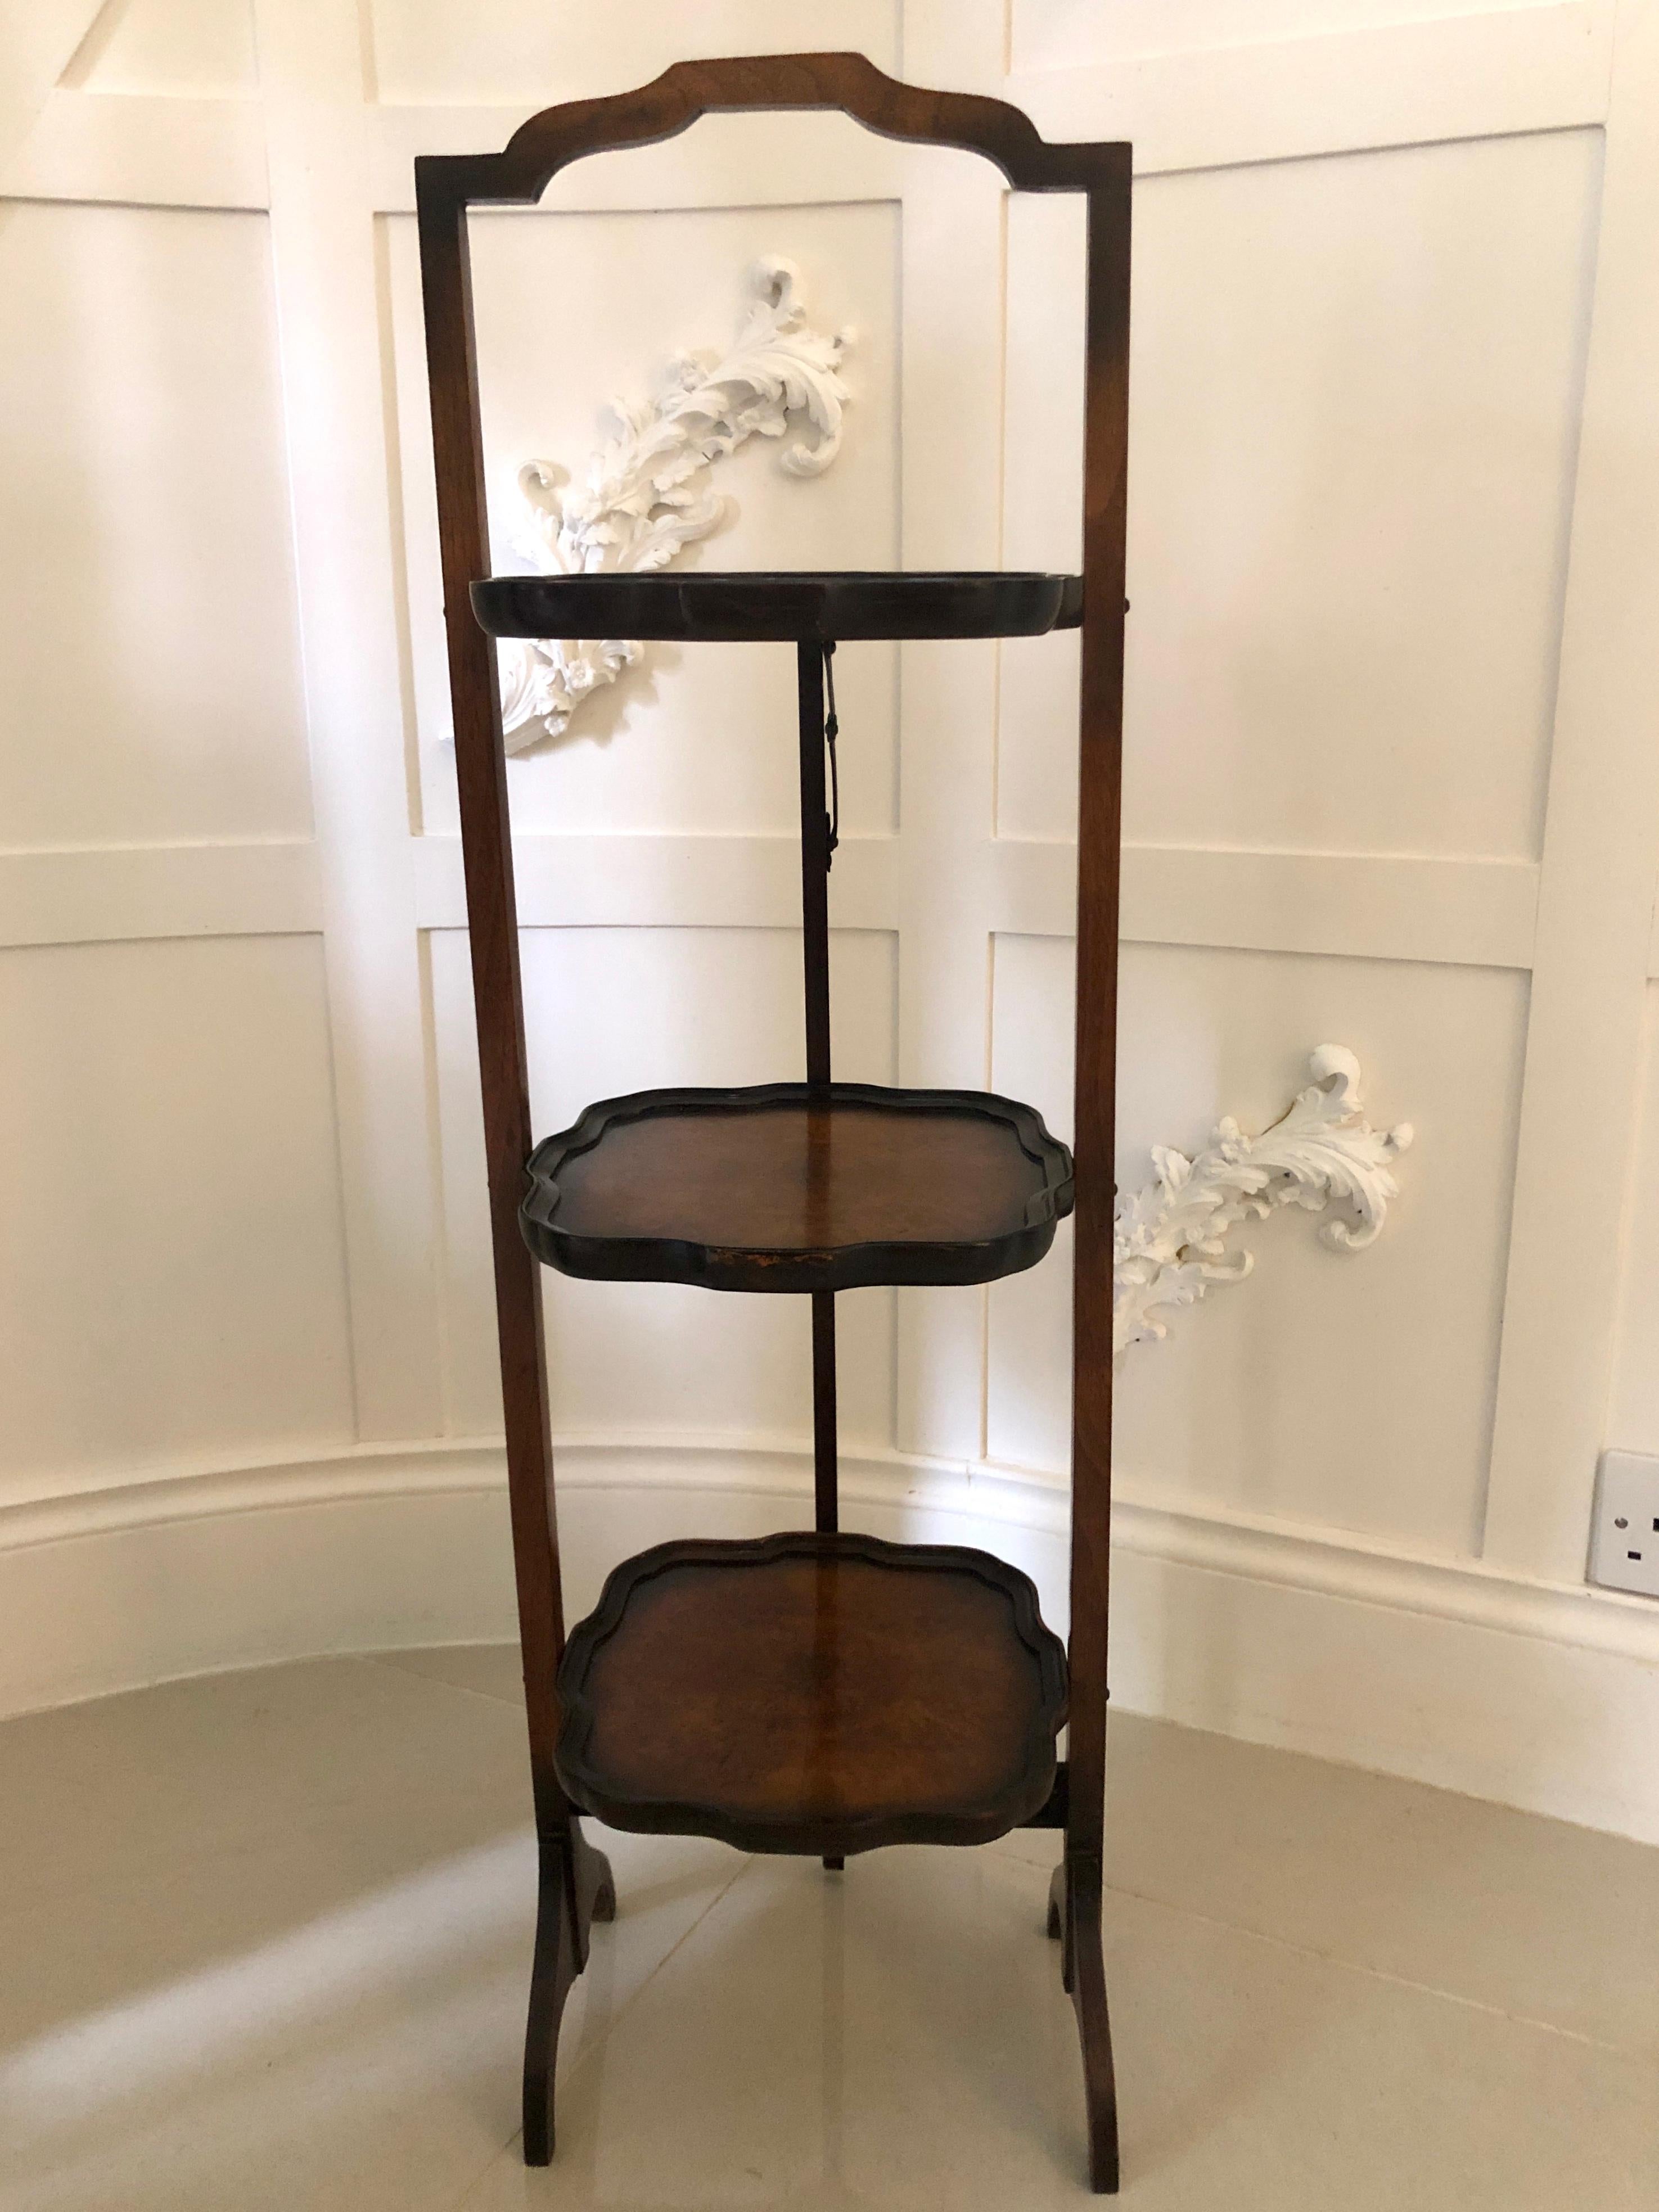 An attractive antique walnut 3-tier cake stand having a lovely shaped top and 3 shaped tiers. The tiers are crafted in walnut which boasts a beautiful shade. It folds for easy storage and stands on elegantly shaped walnut legs.

Measures: Cake